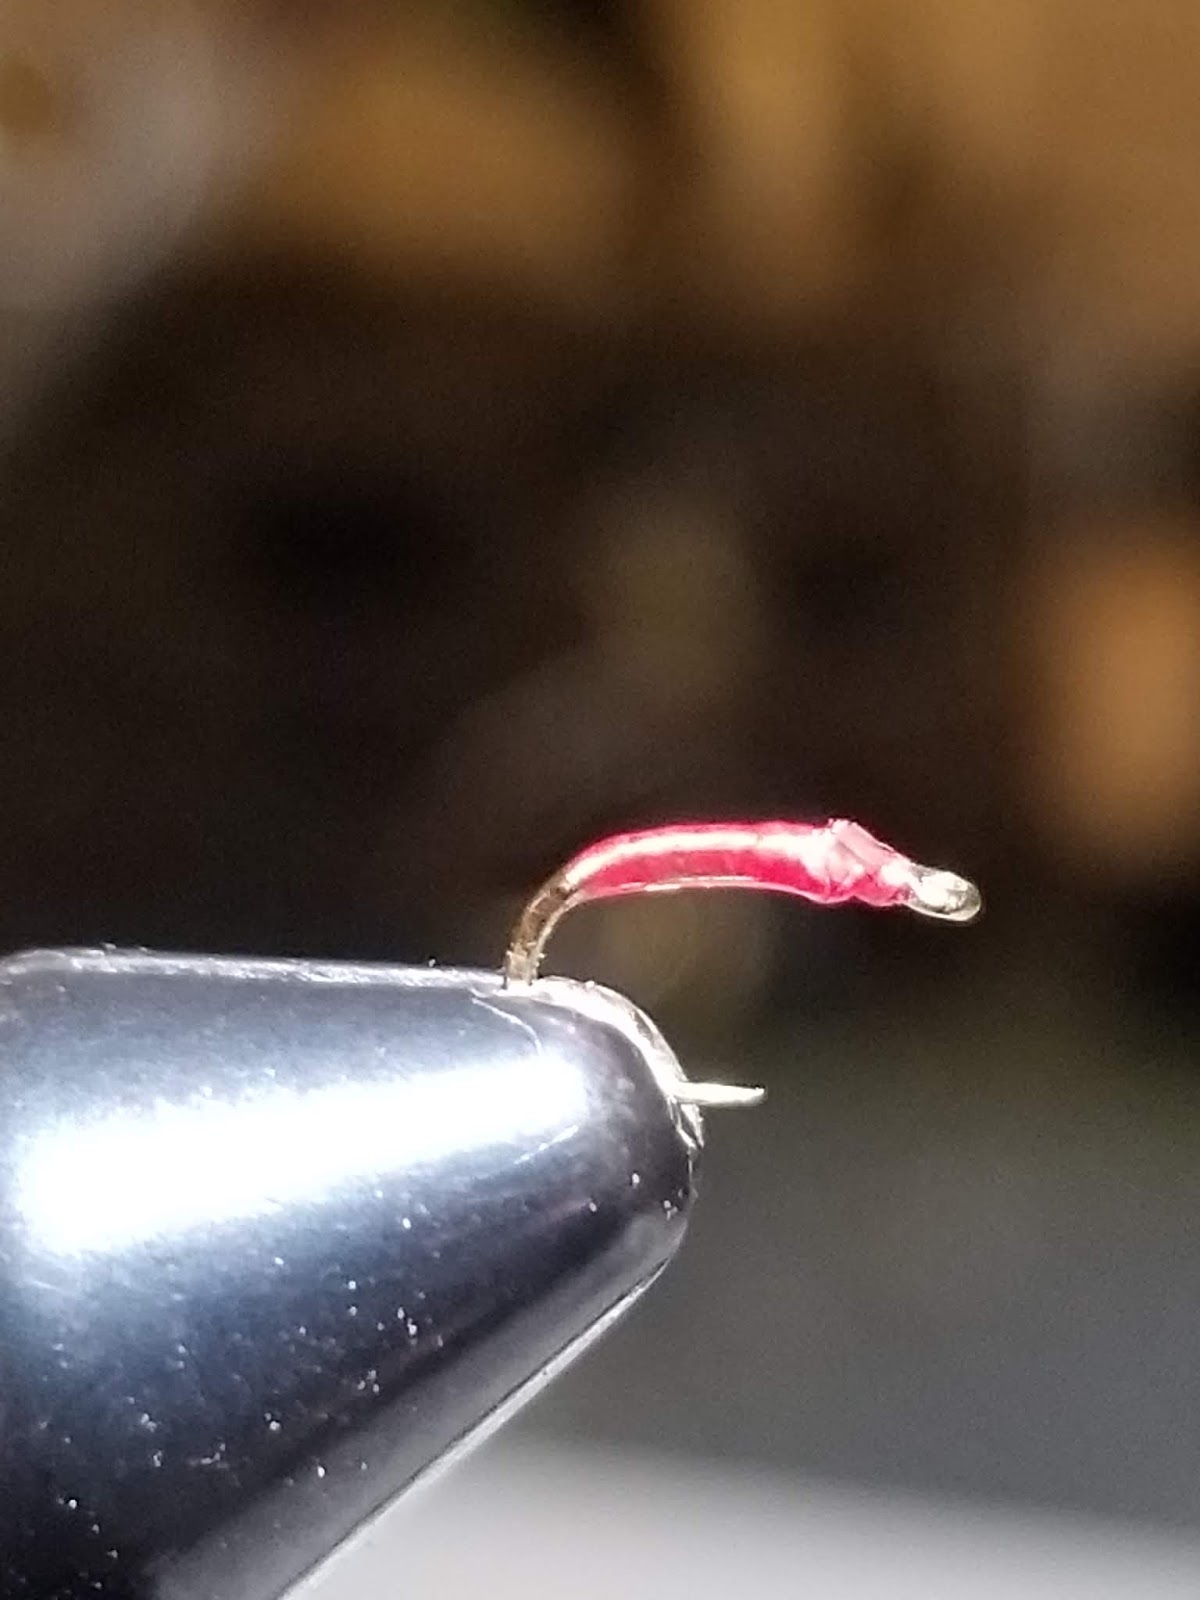 Welcome to the Millers River Fly Fishing Forum : The EB, The Swift